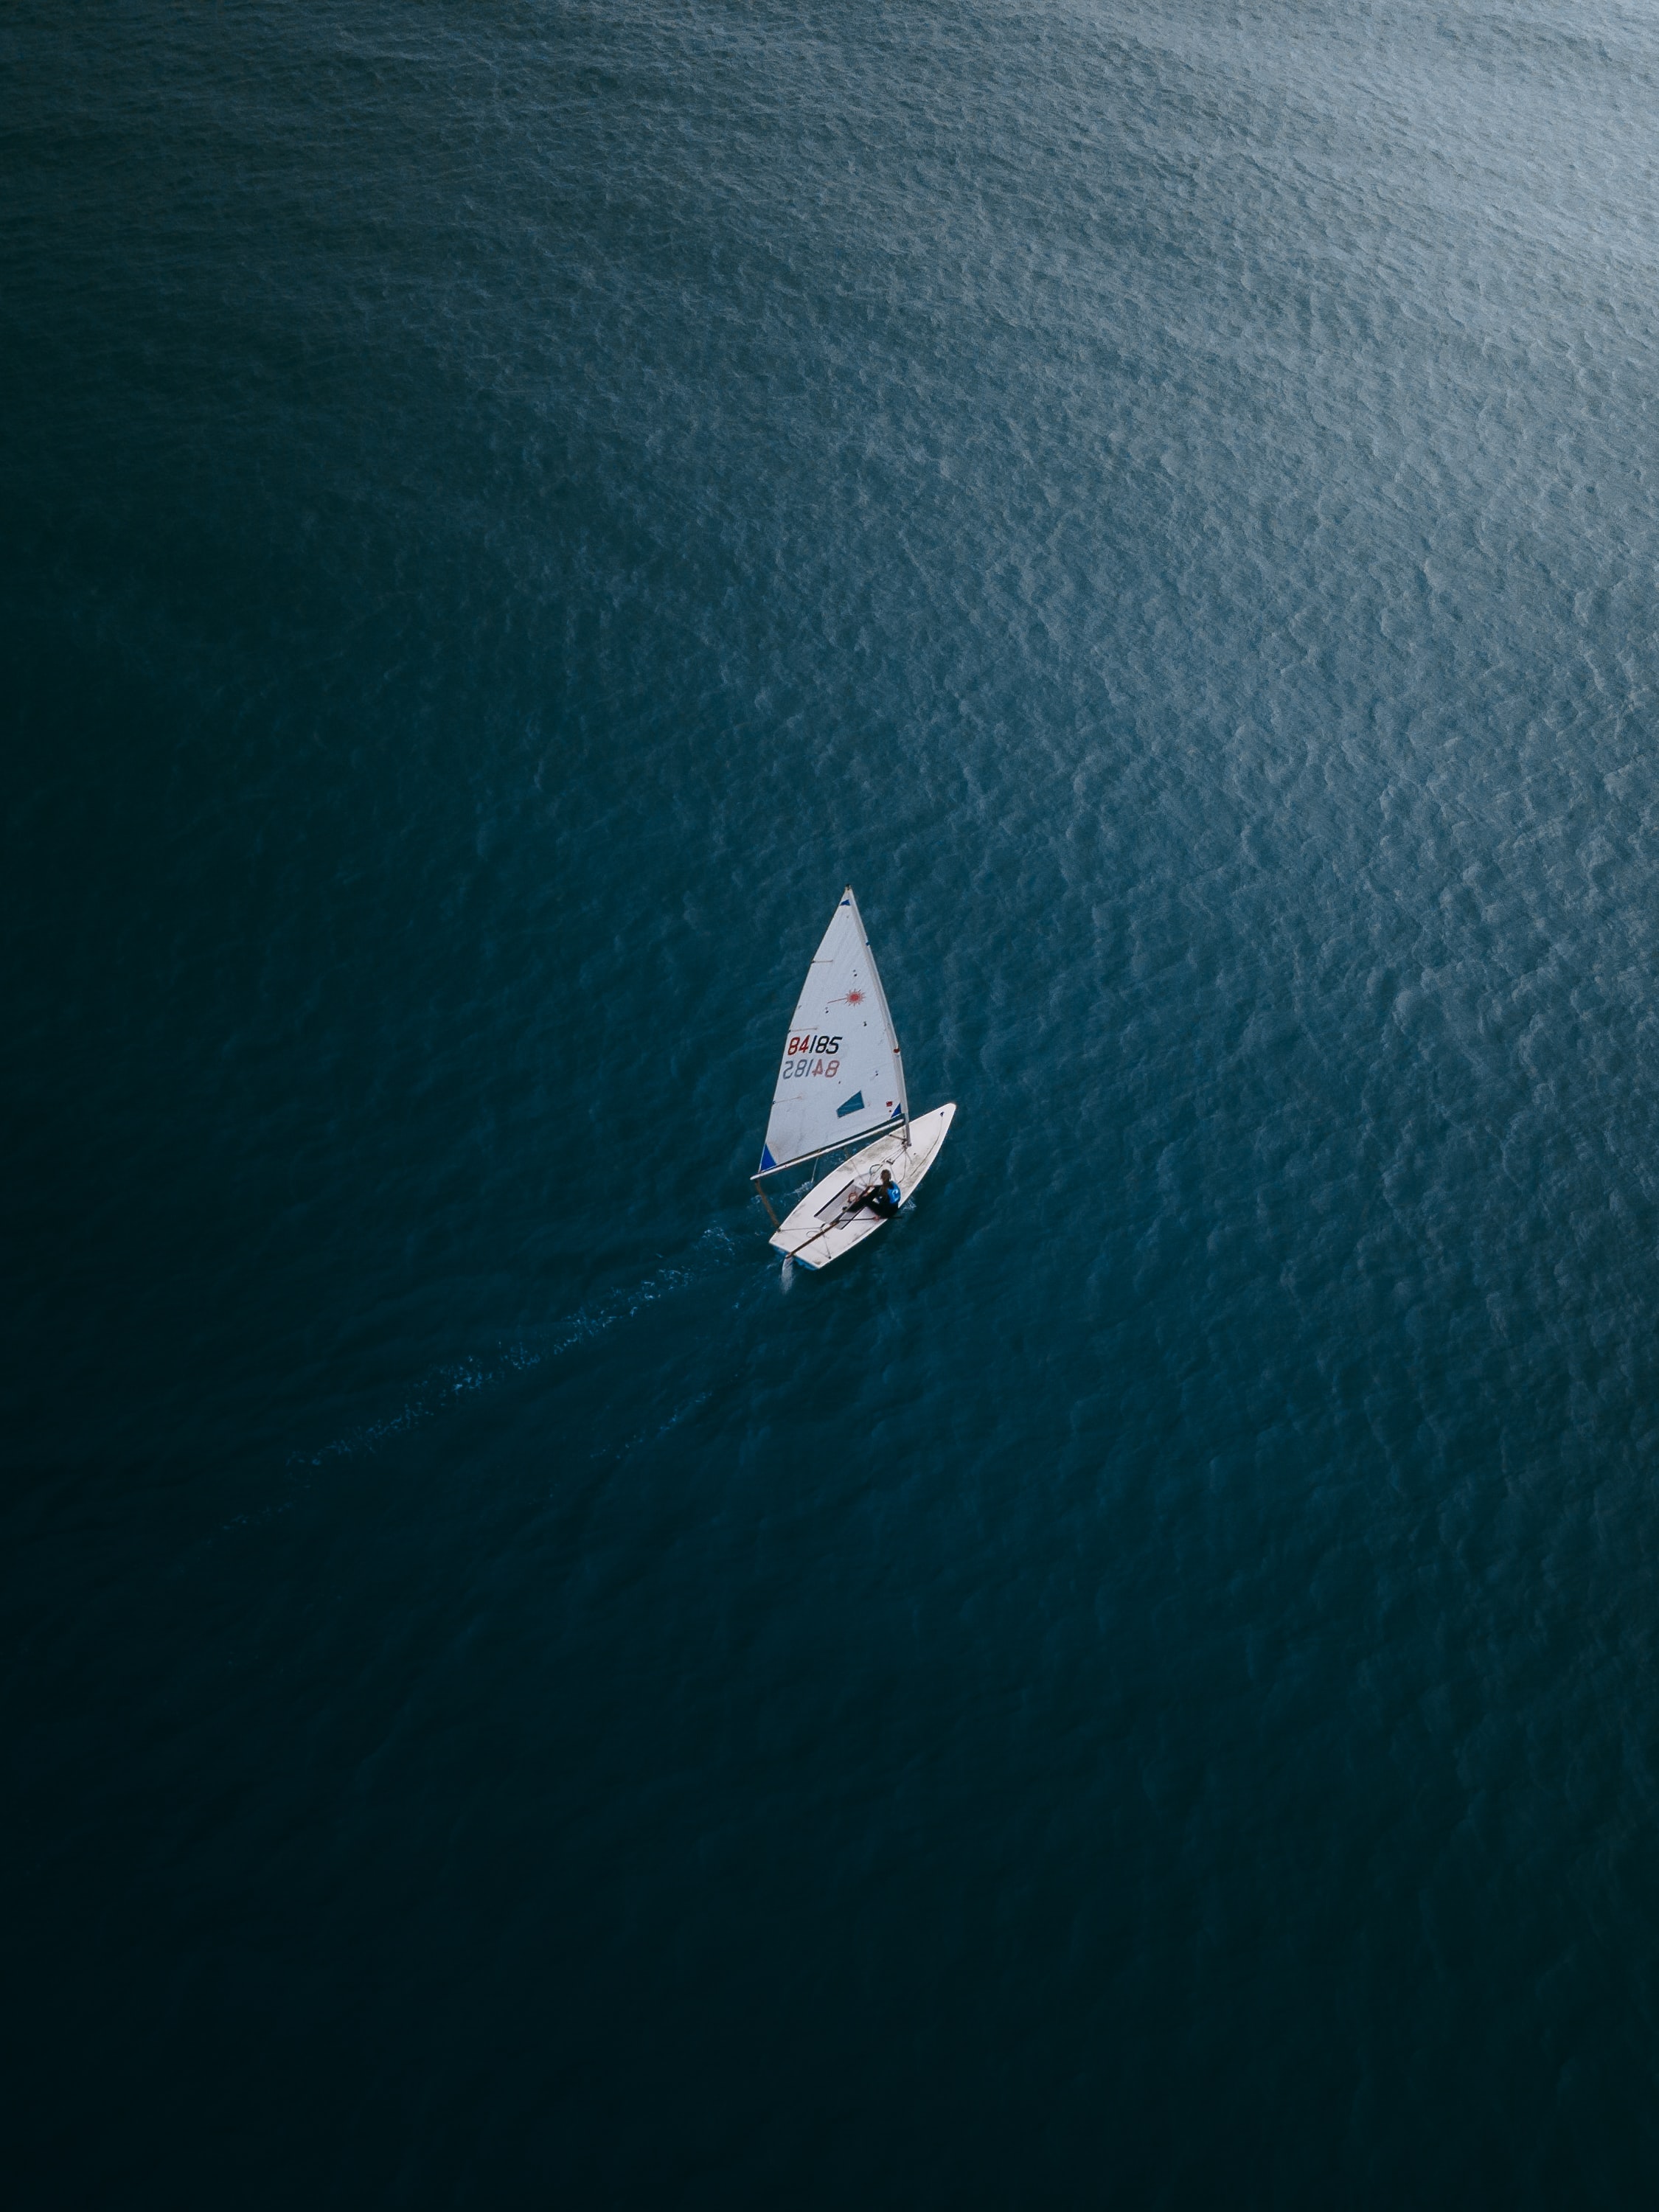 sea, boat, loneliness, water, view from above, miscellanea, miscellaneous